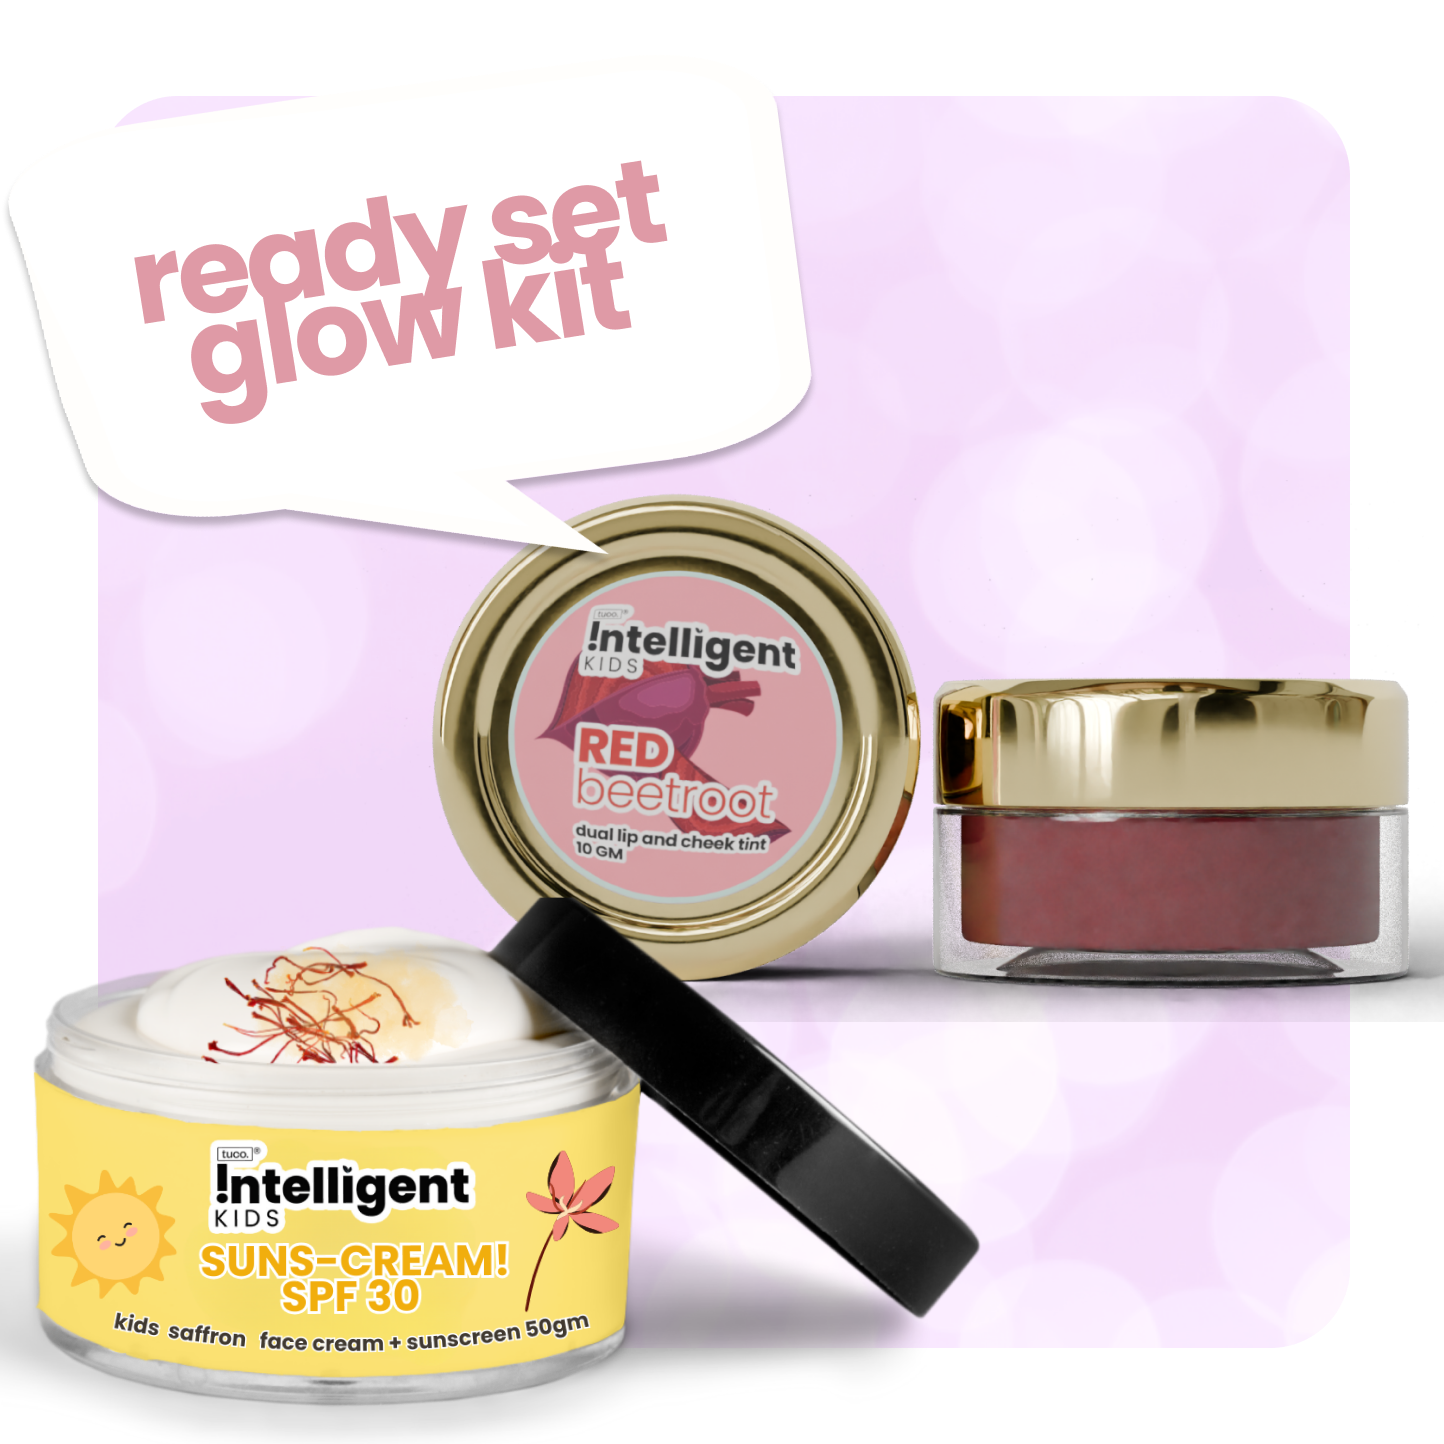 Tuco Intelligent Ready Set Glow Kit for Kids - Natural Skincare Pack. Includes Red Beetroot Dual Lip and Cheek Tint (10g) for a natural, healthy flush and Suns-Cream SPF 30 (50g) with saffron for sun protection and moisturizing. Gentle, effective skincare solutions designed for children to keep their skin radiant, protected, and nourished. Ideal for daily use, made with natural ingredients, and safe for sensitive skin.